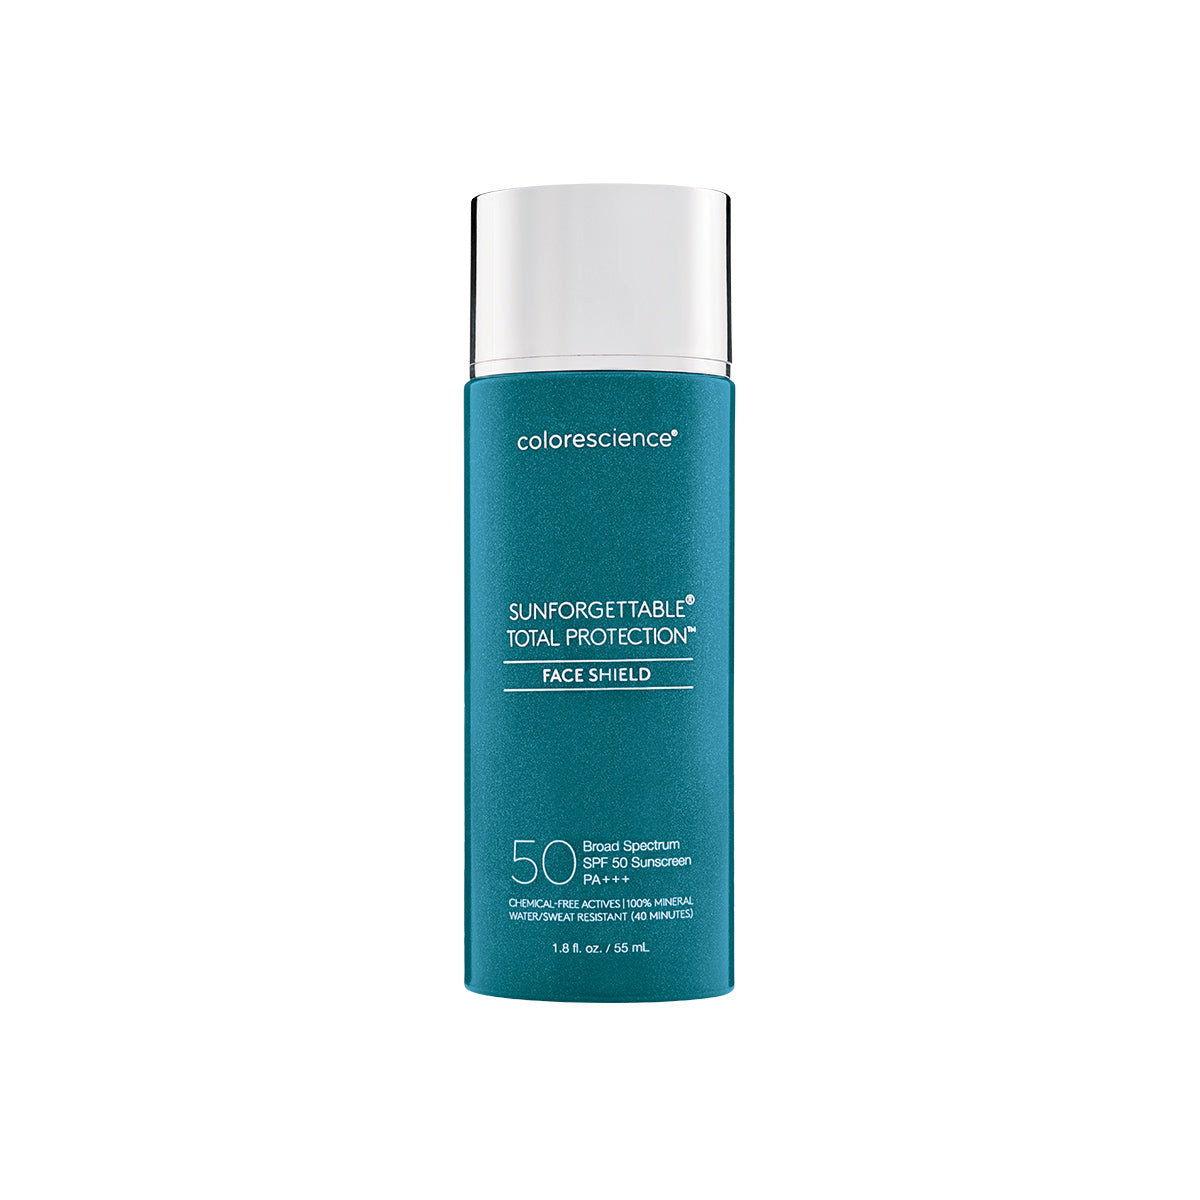 COLORSCIENCE SUNFORGETTABLE FACE SHIELD CLASSIC SPF50 55 ML | The Glow Shop